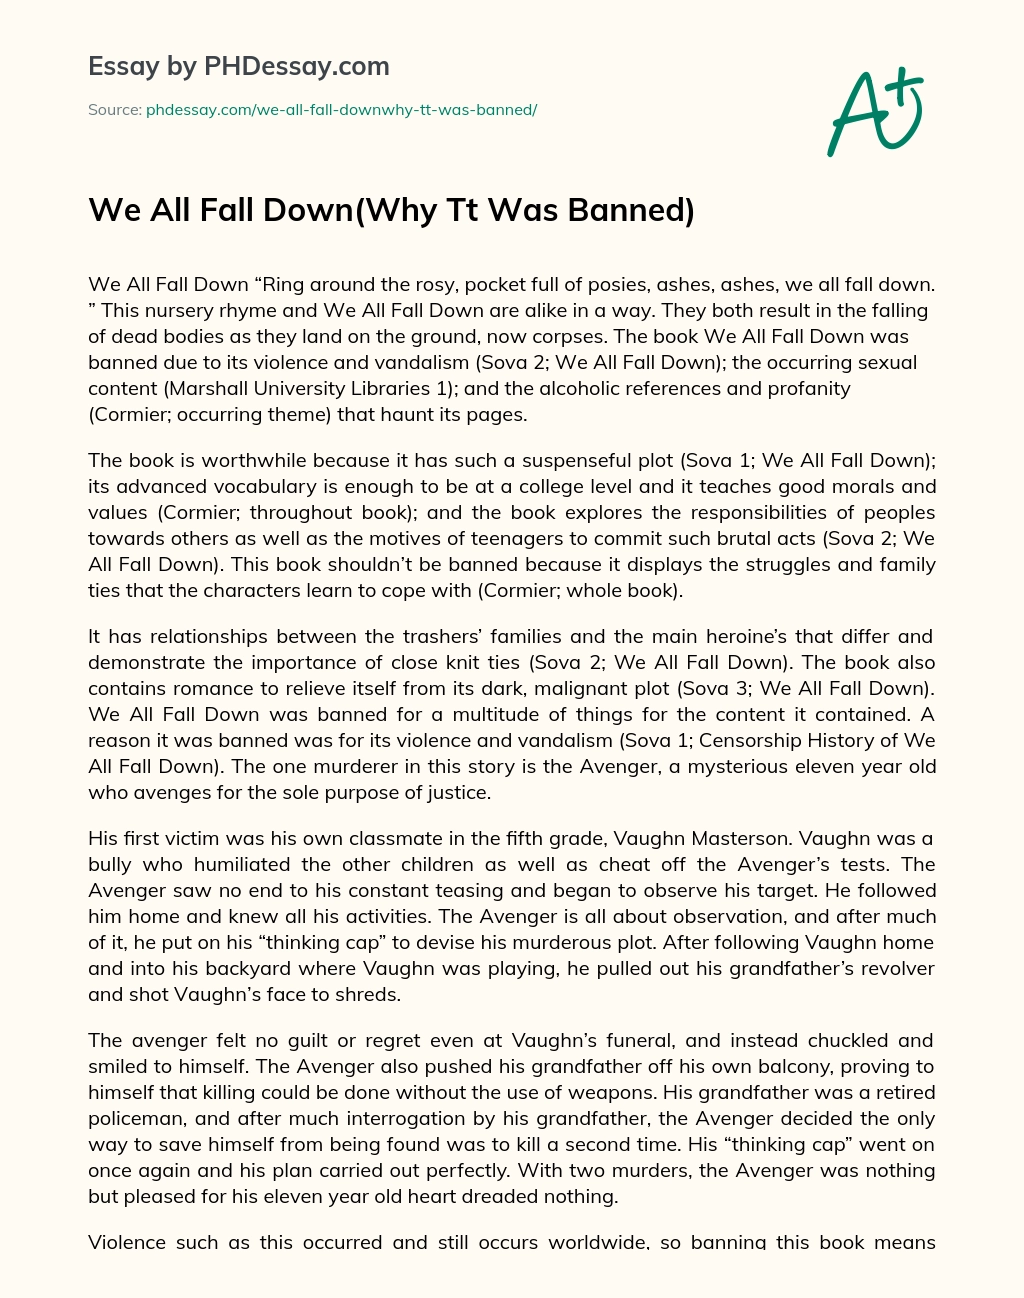 We All Fall Down(Why Tt Was Banned) essay